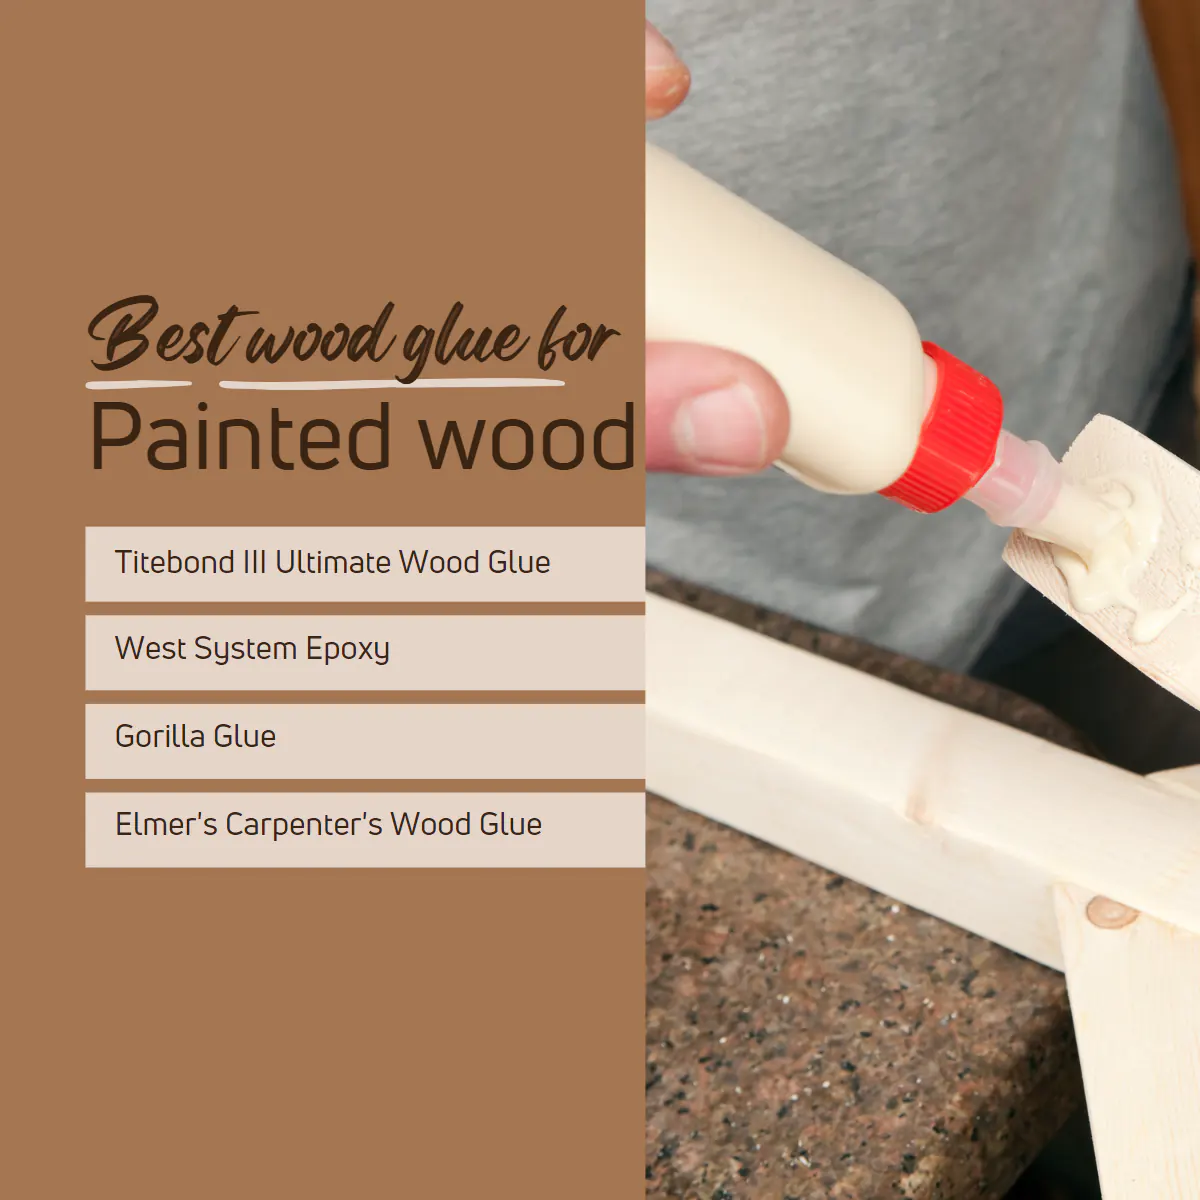 Best wood glue for painted wood